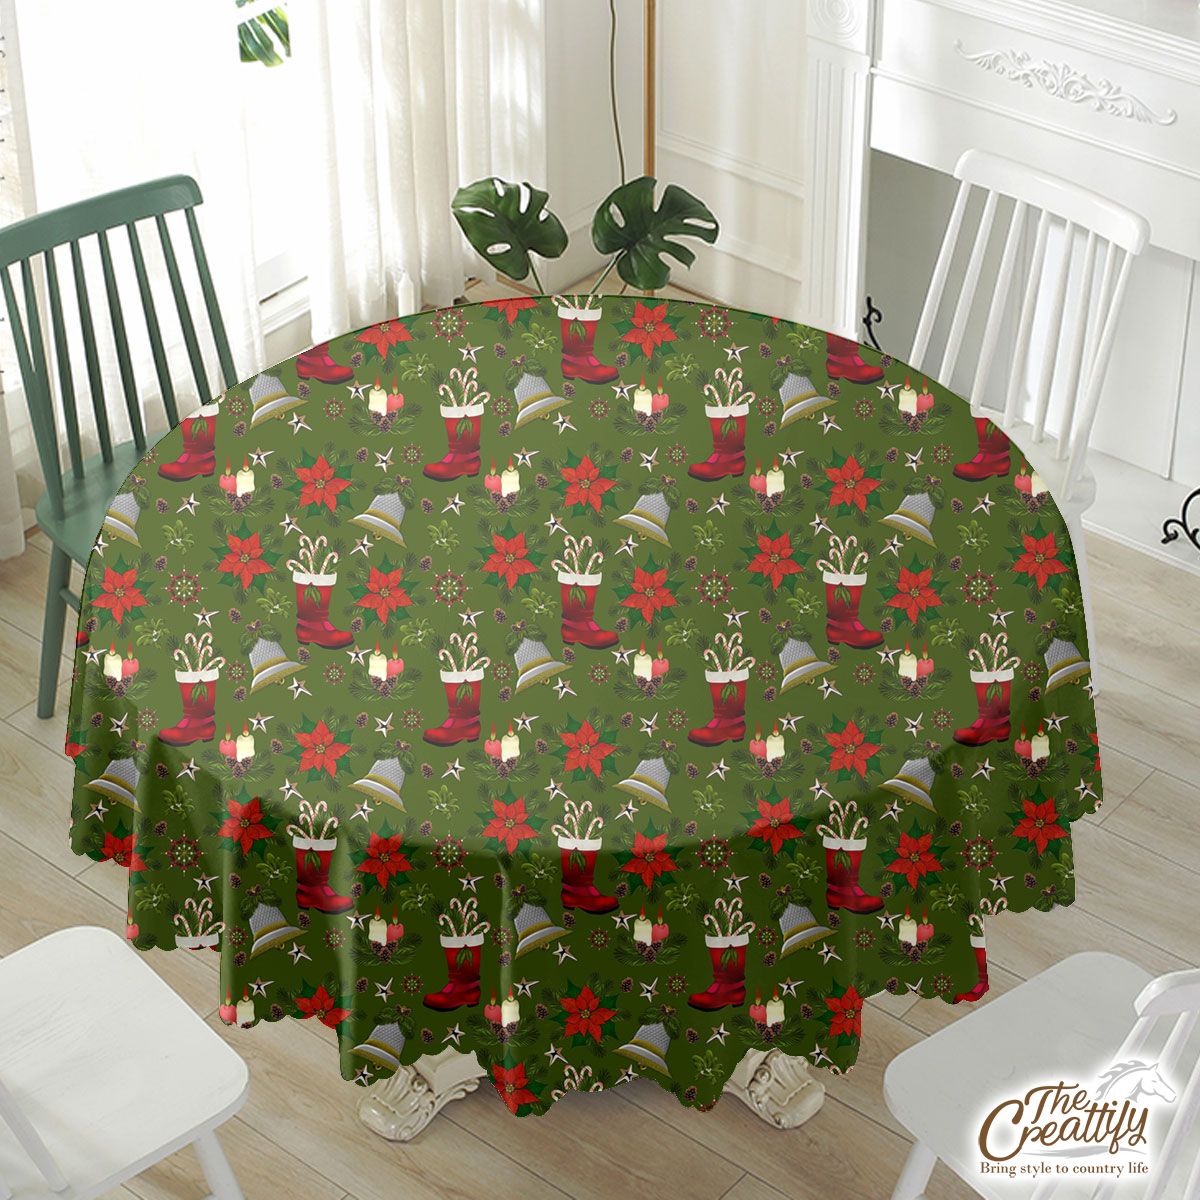 Christmas Candles, Candy Canes, Poinsettia And Bells Waterproof Tablecloth